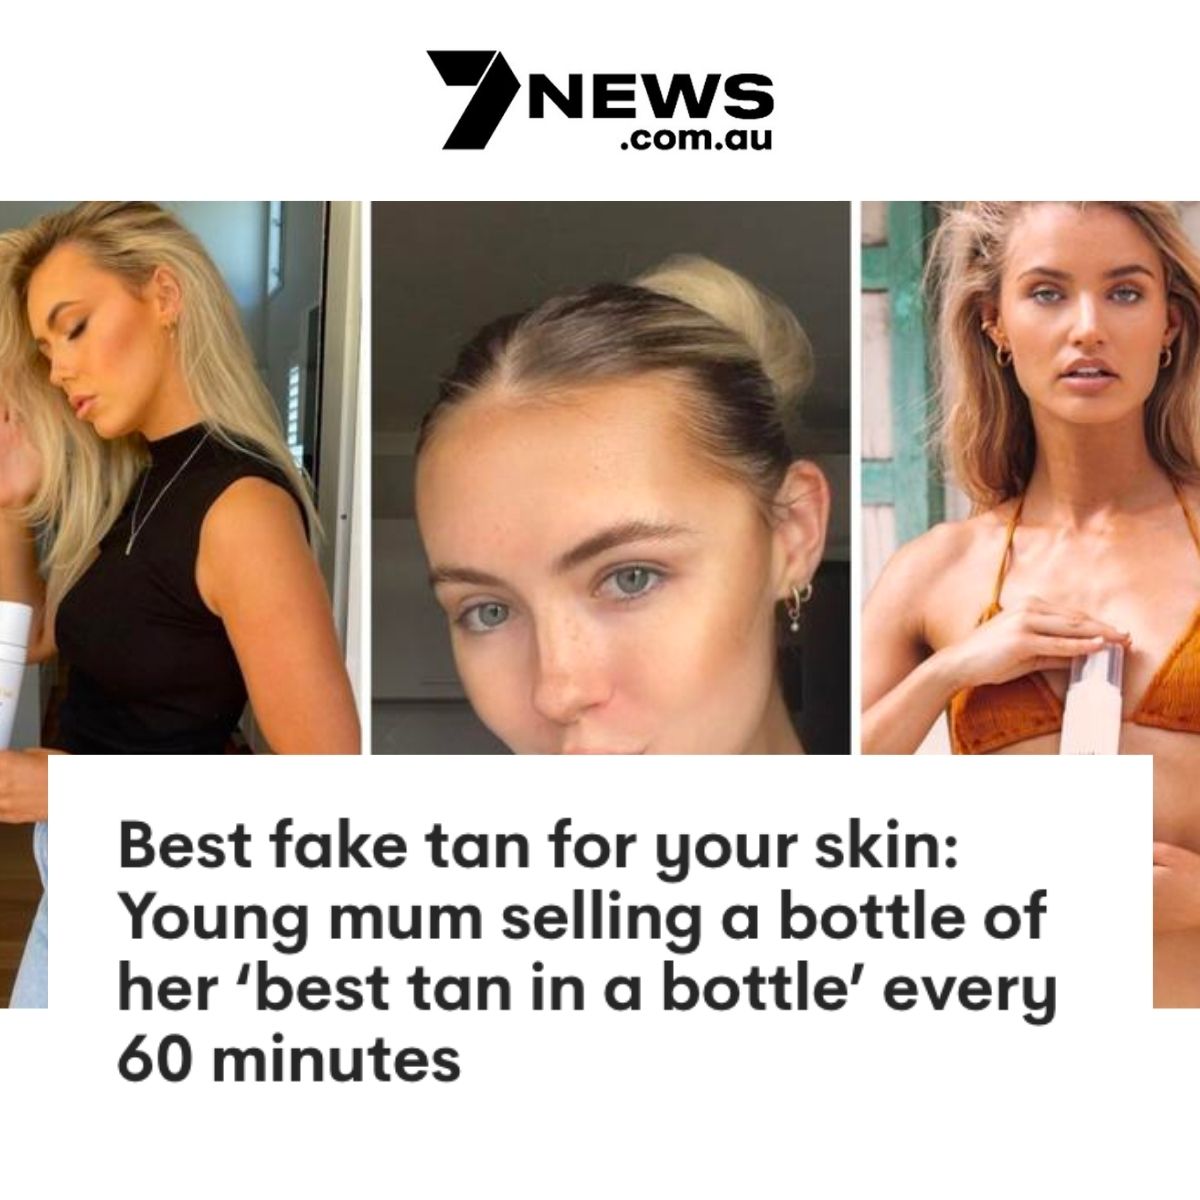 Best fake tan for your skin: Young mum selling a bottle of her ‘best tan in a bottle’ every 60 minutes